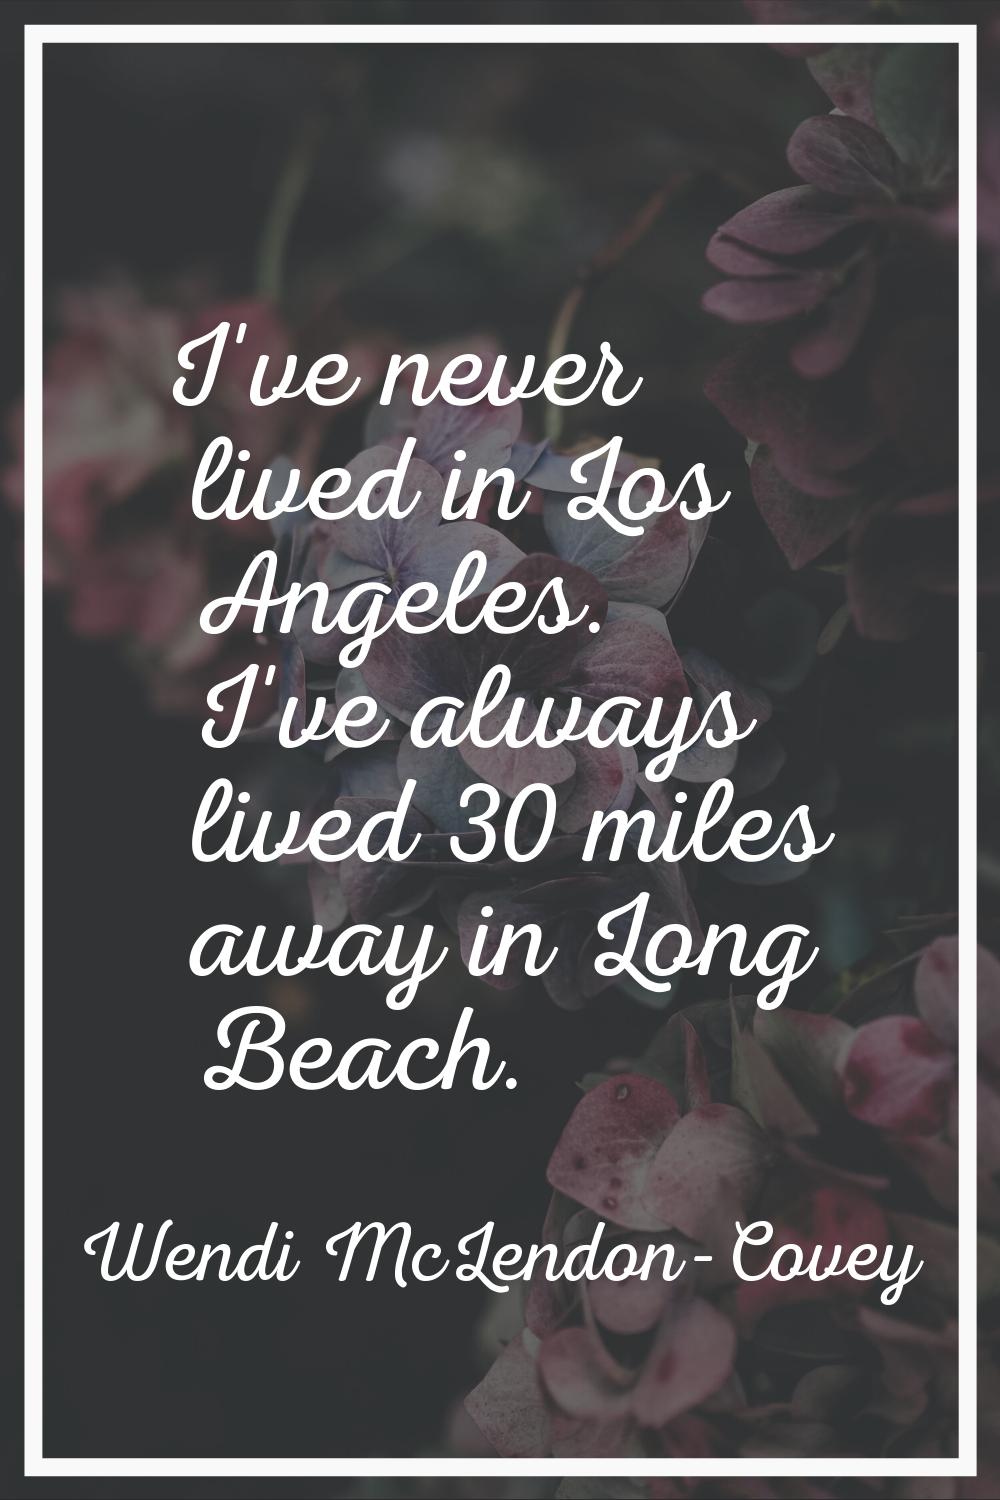 I've never lived in Los Angeles. I've always lived 30 miles away in Long Beach.